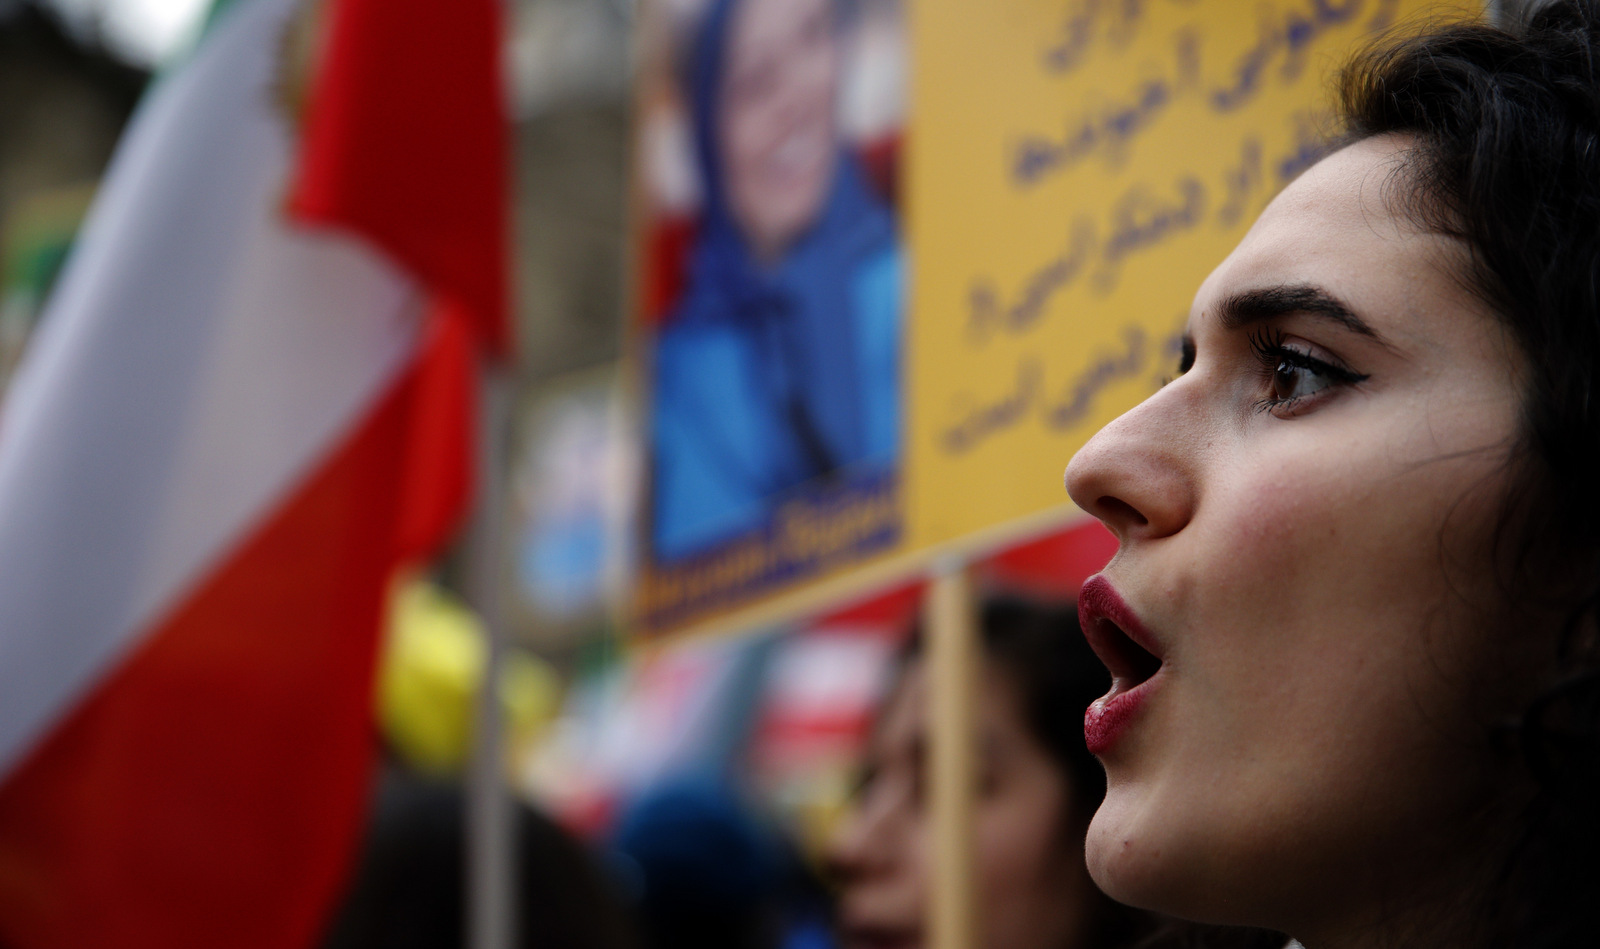 Demonstrators of the National Council of Resistance of Iran protest near the Iran's embassy in Paris, a photo of Maryam Rajavi, former leader of the MEK, is visible in the background, Jan. 6, 2018 (AP/Christophe Ena)